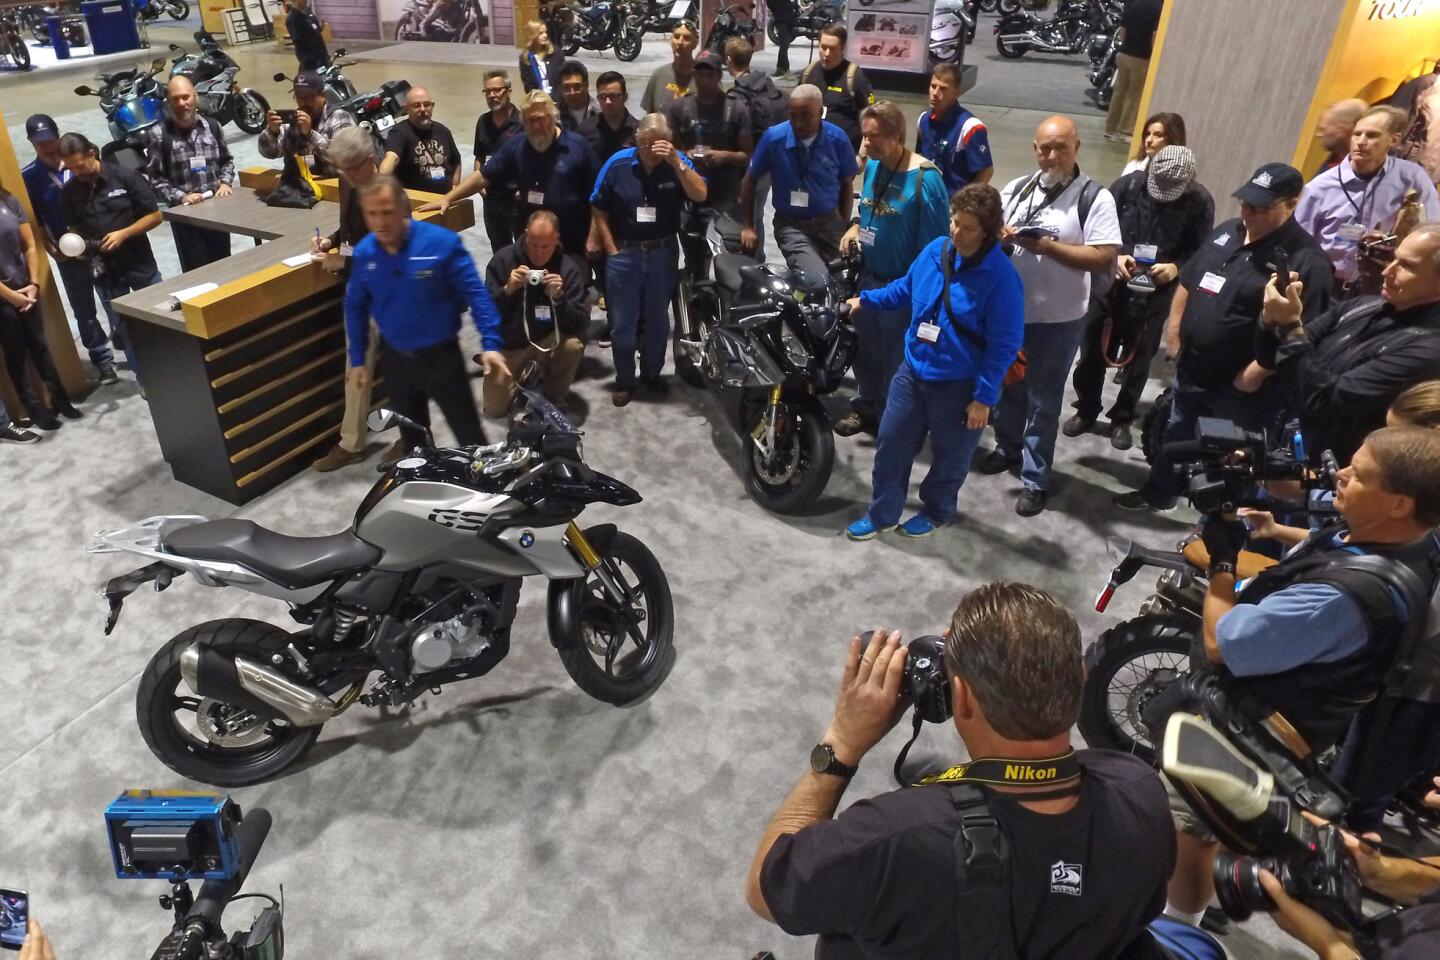 Long Beach motorcycle show